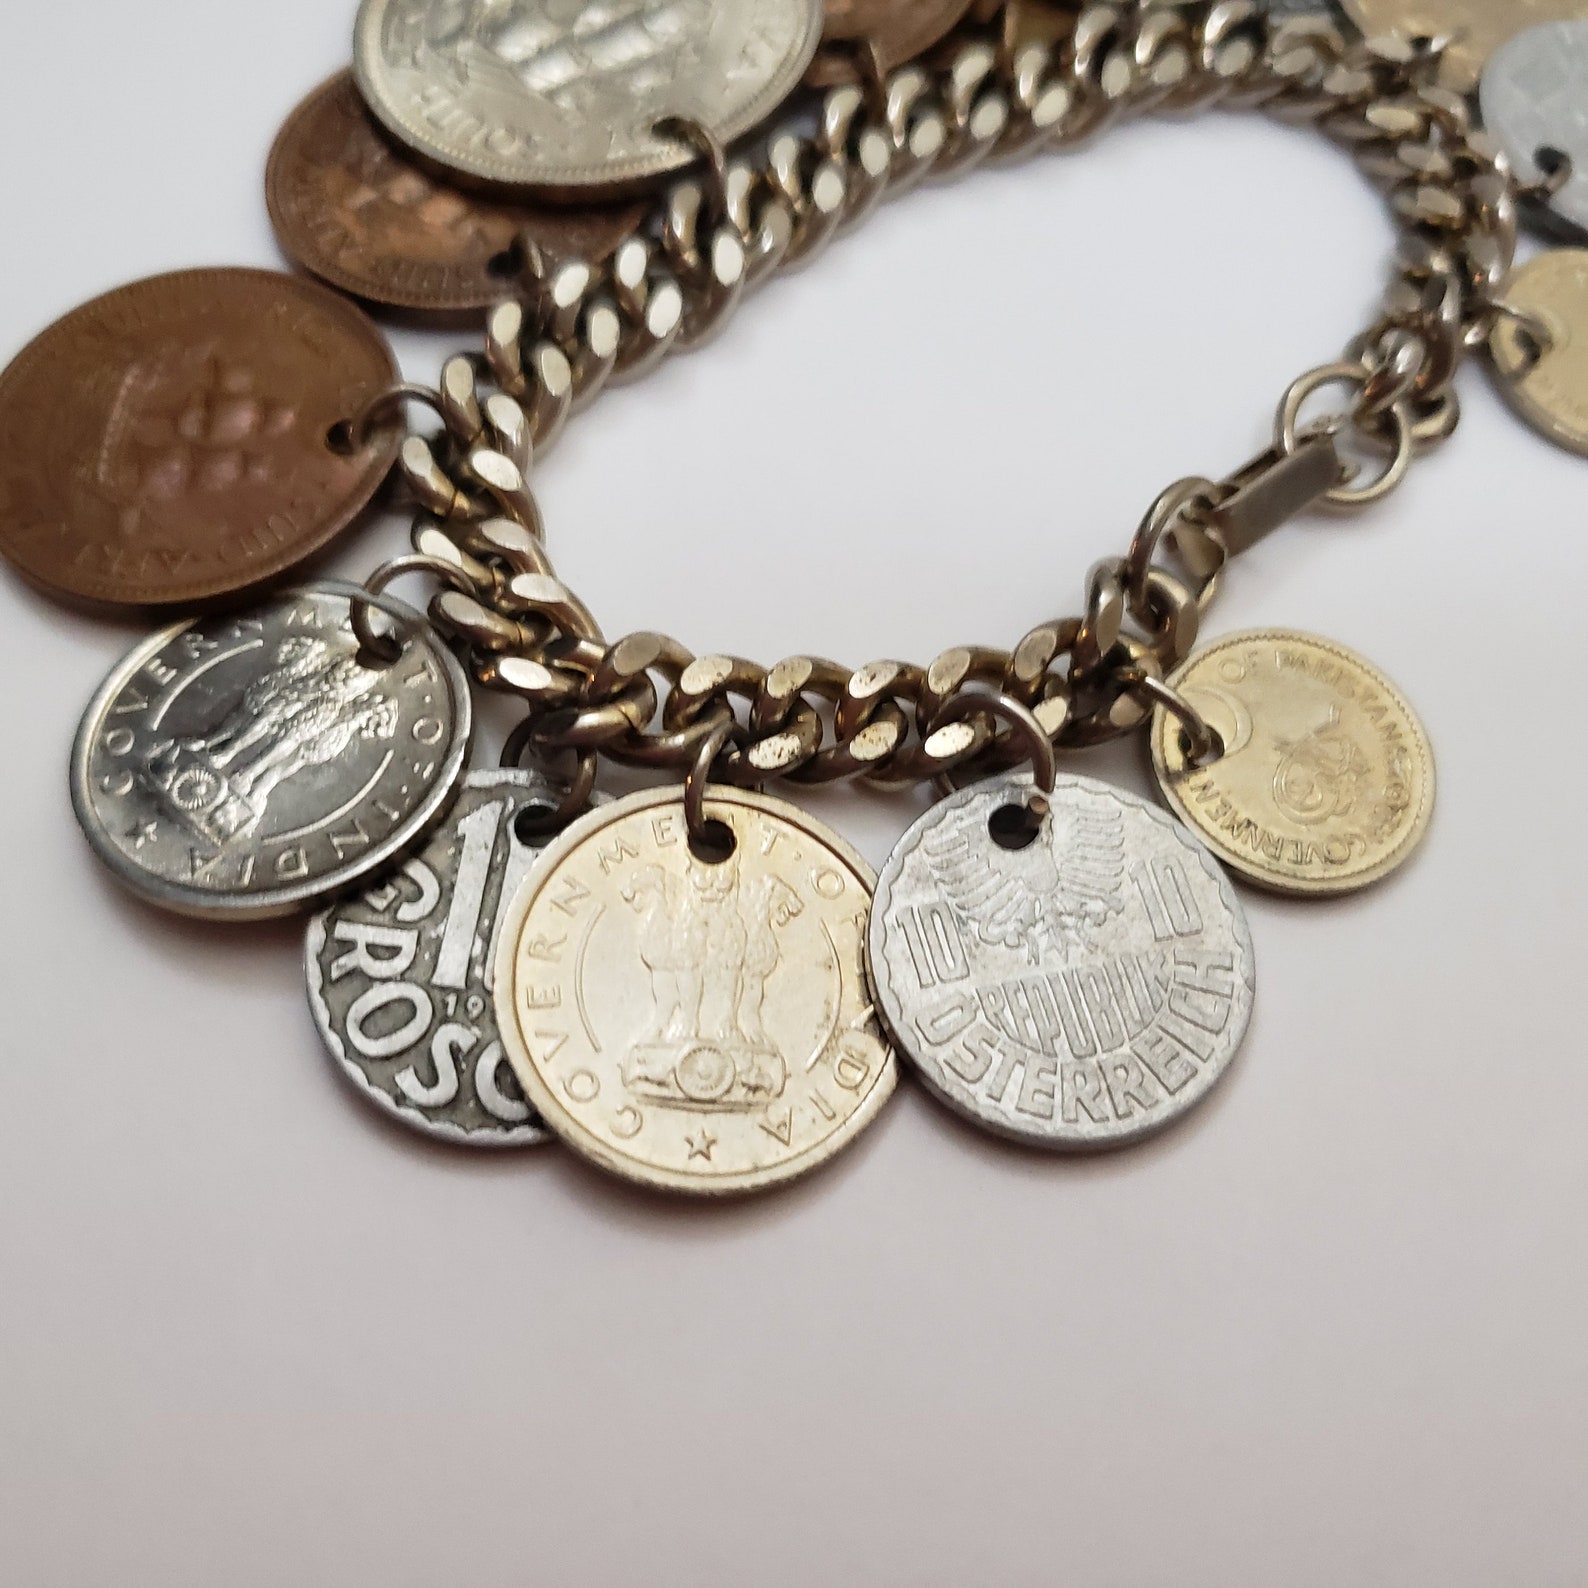 Silver Tone Coin Charm Bracelet with Foreign Coins from | Etsy